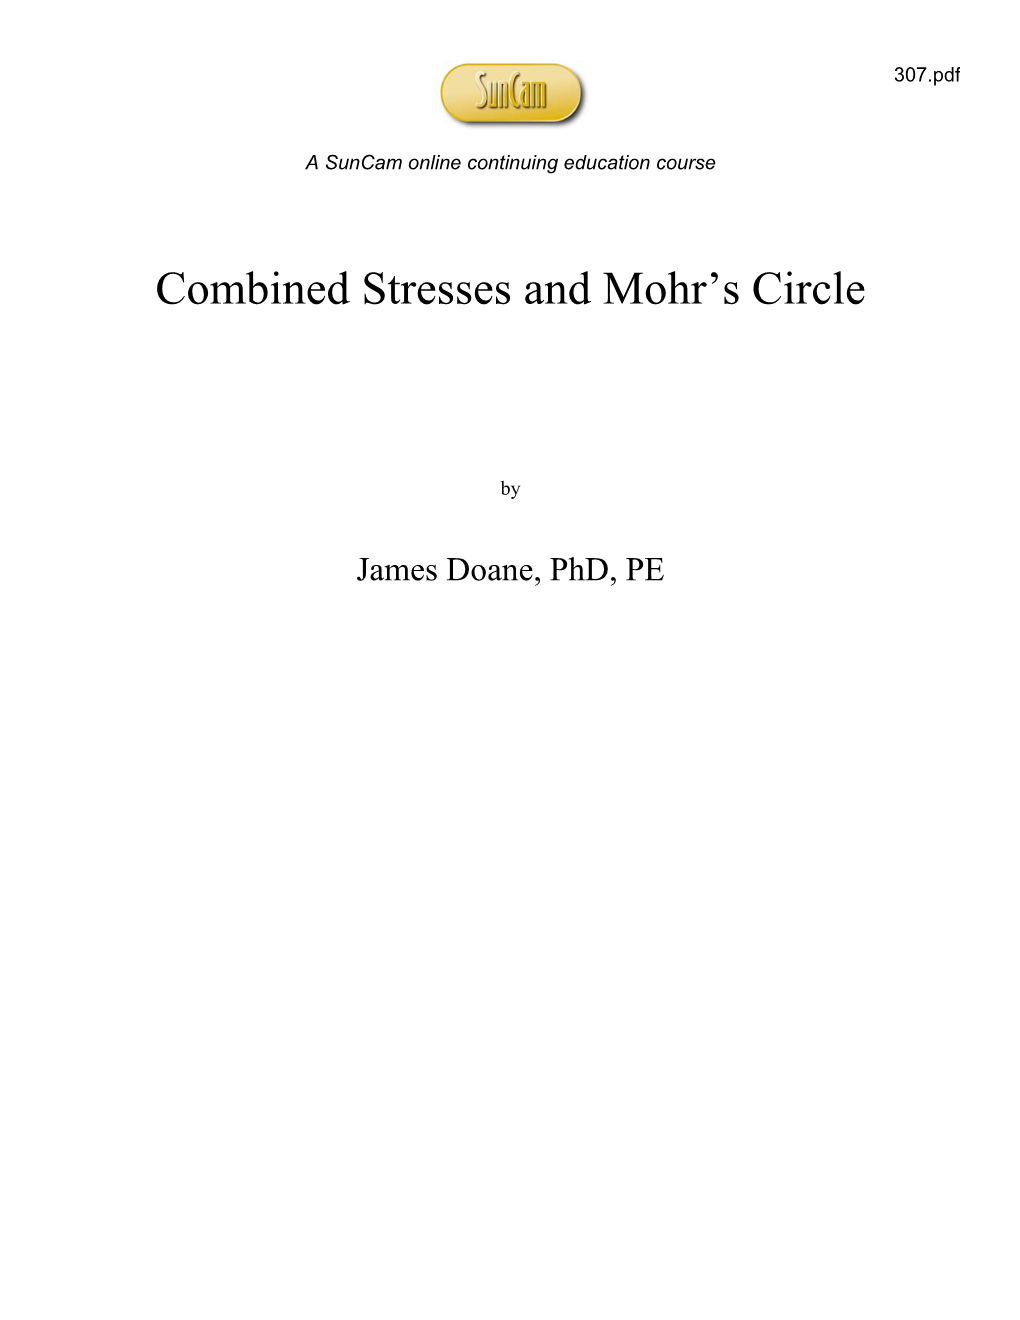 Combined Stresses and Mohr's Circle